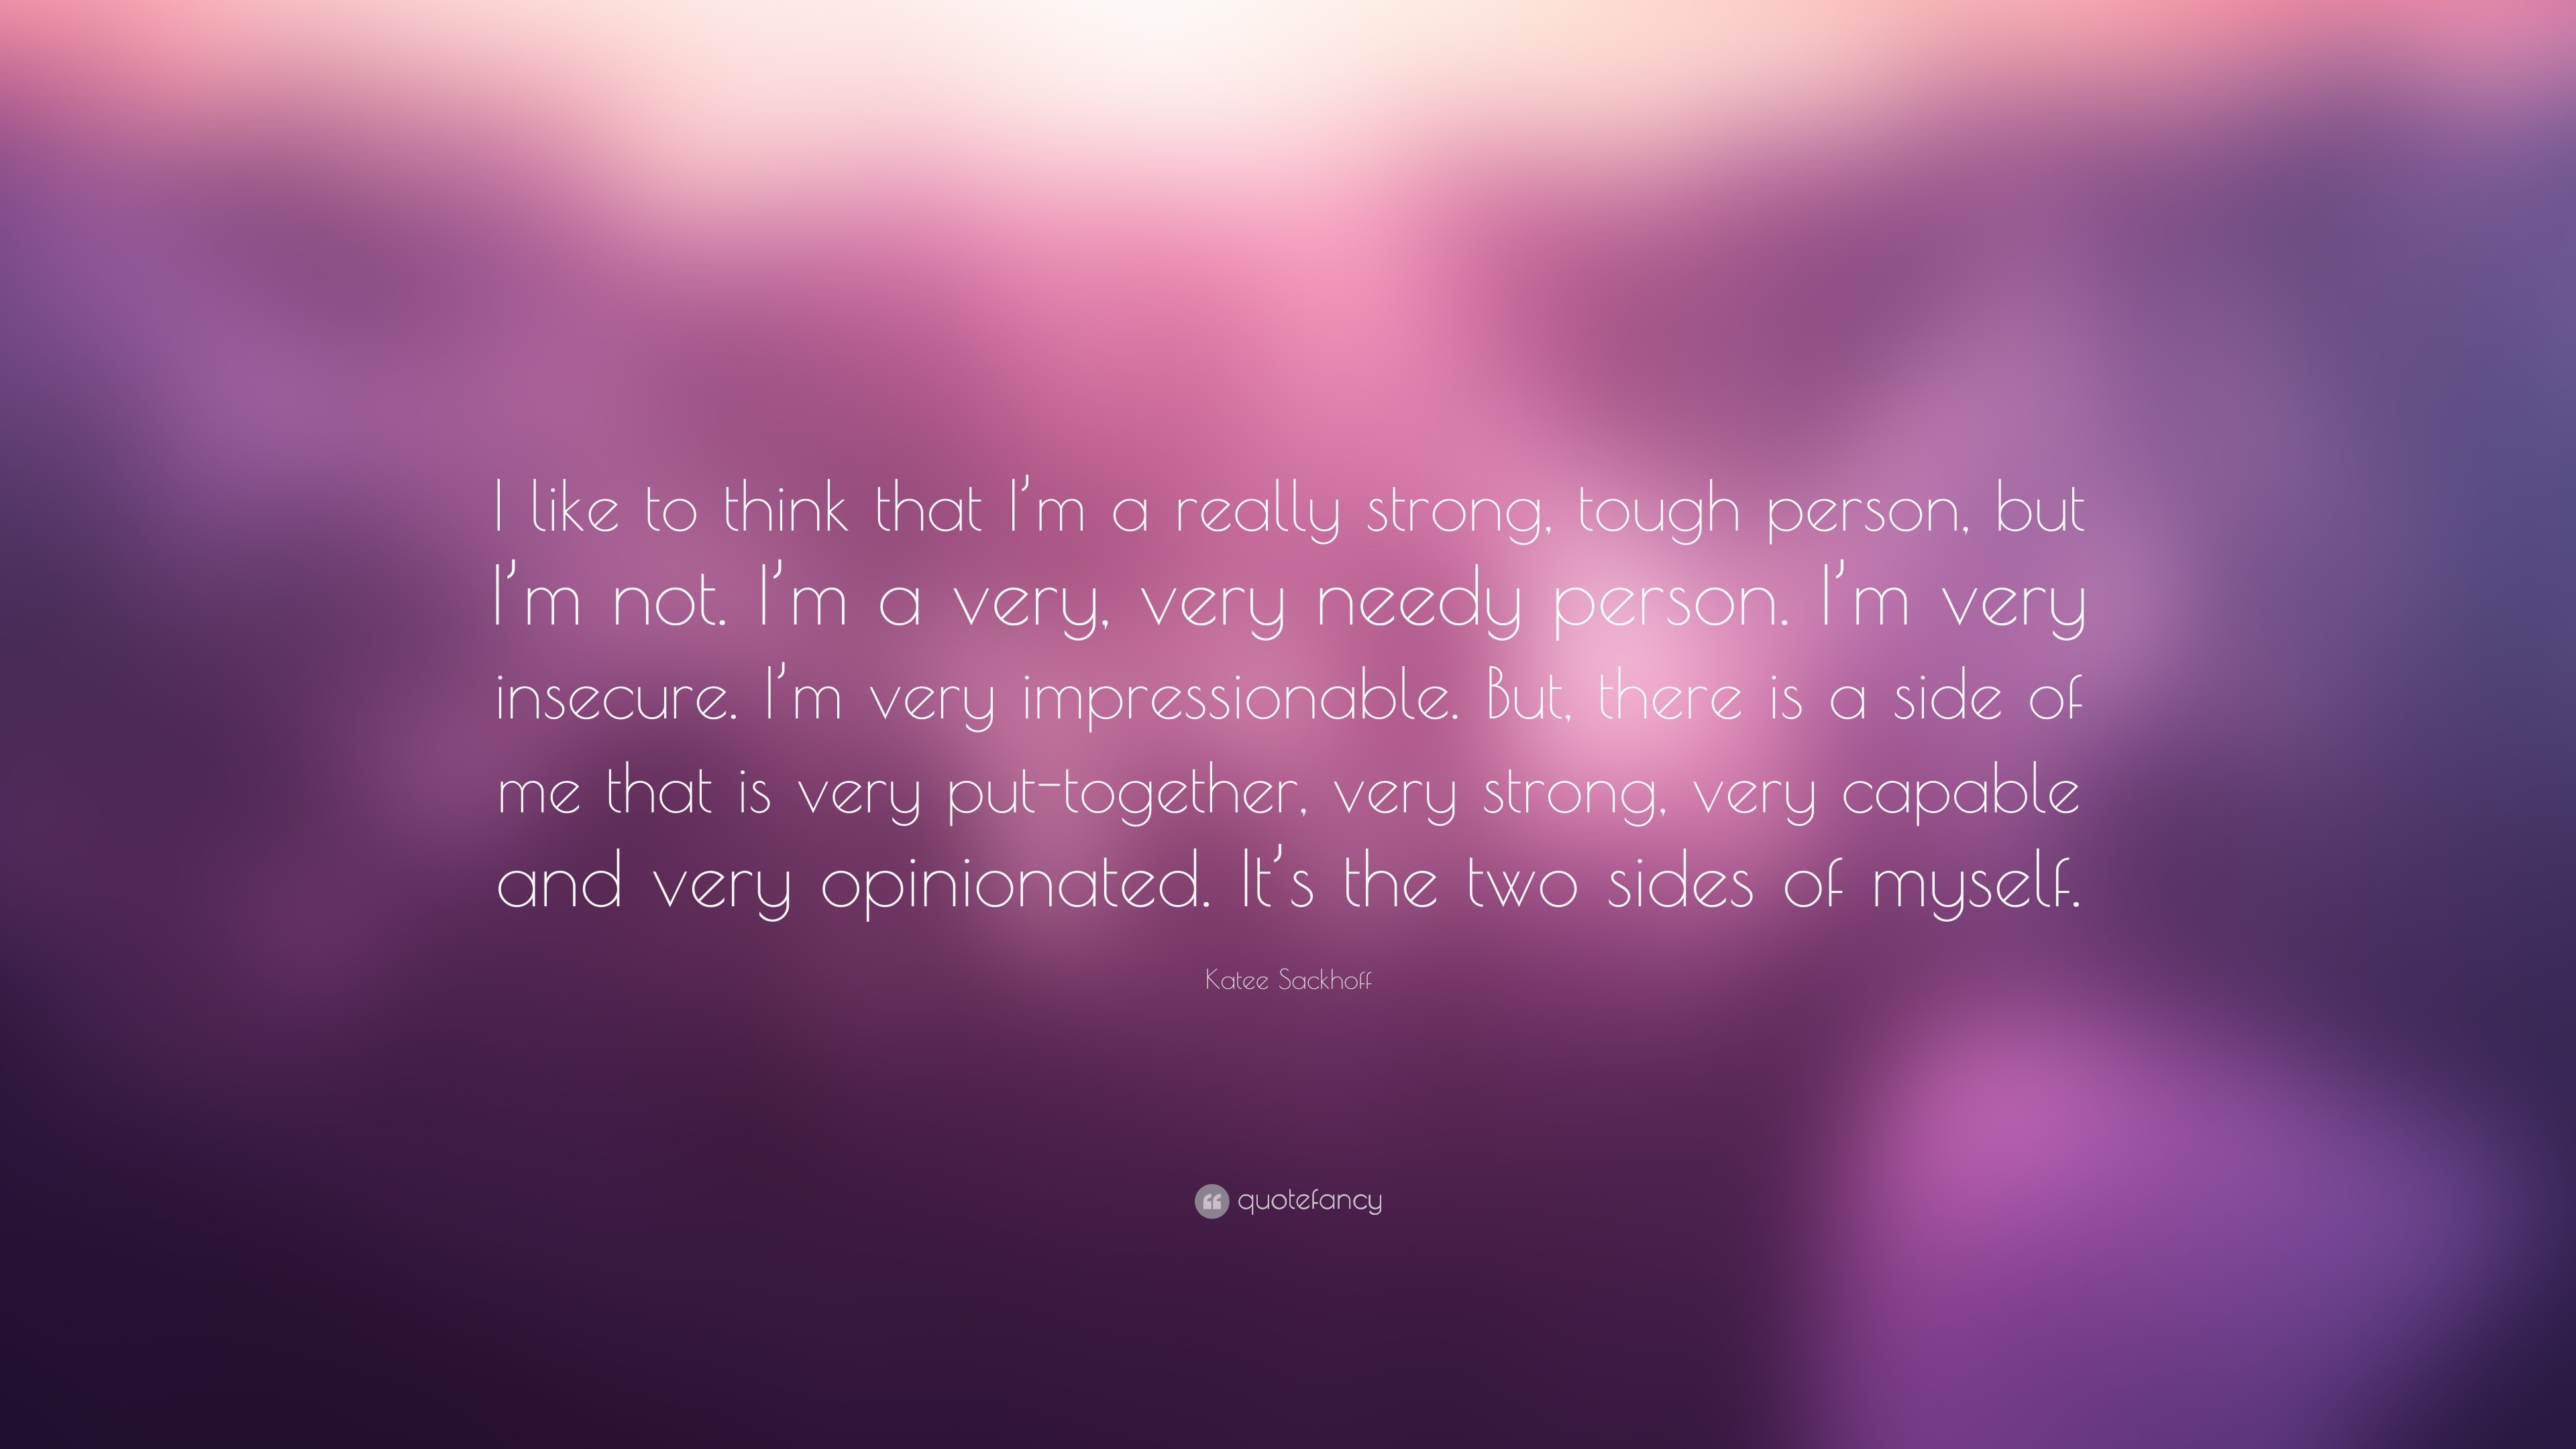 Katee Sackhoff Quote: “I like to think that I’m a really strong, tough ...